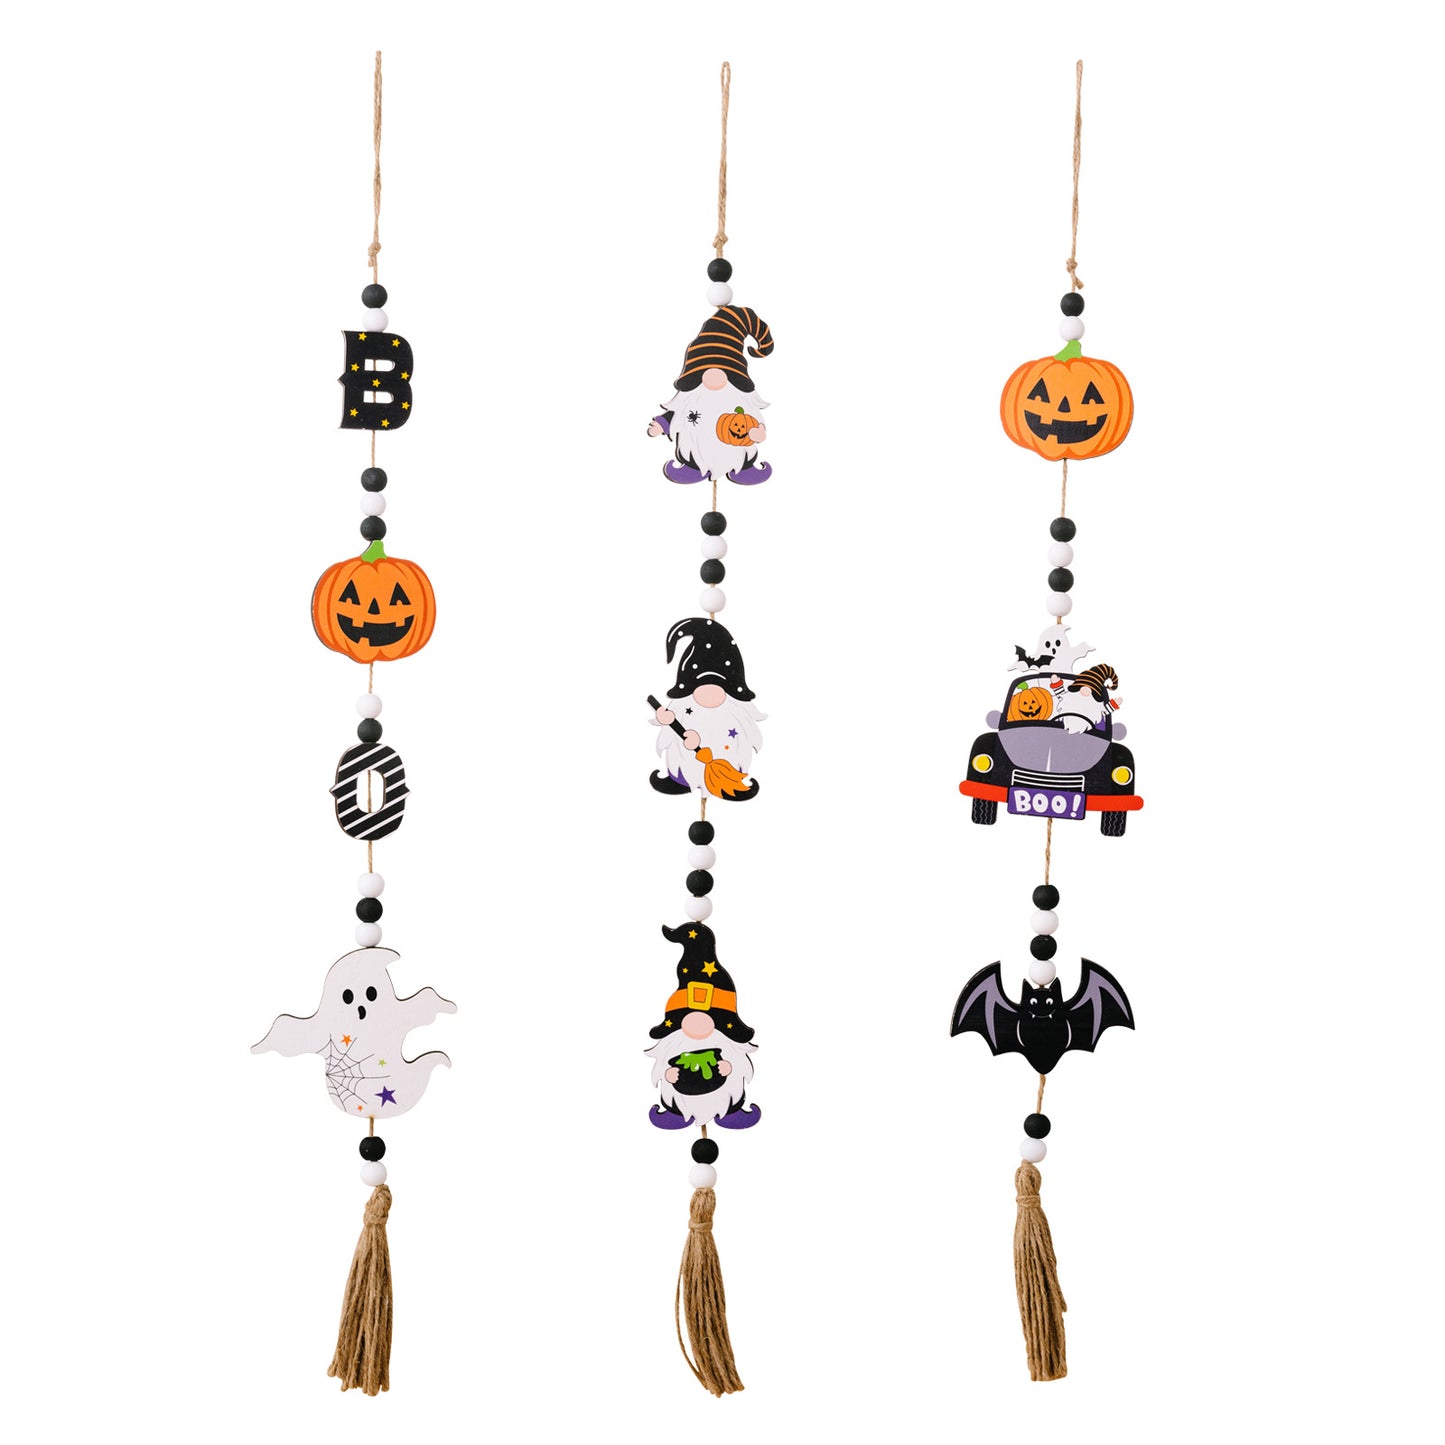 3pc Set Wooden Hanging Halloween Wall Decorations